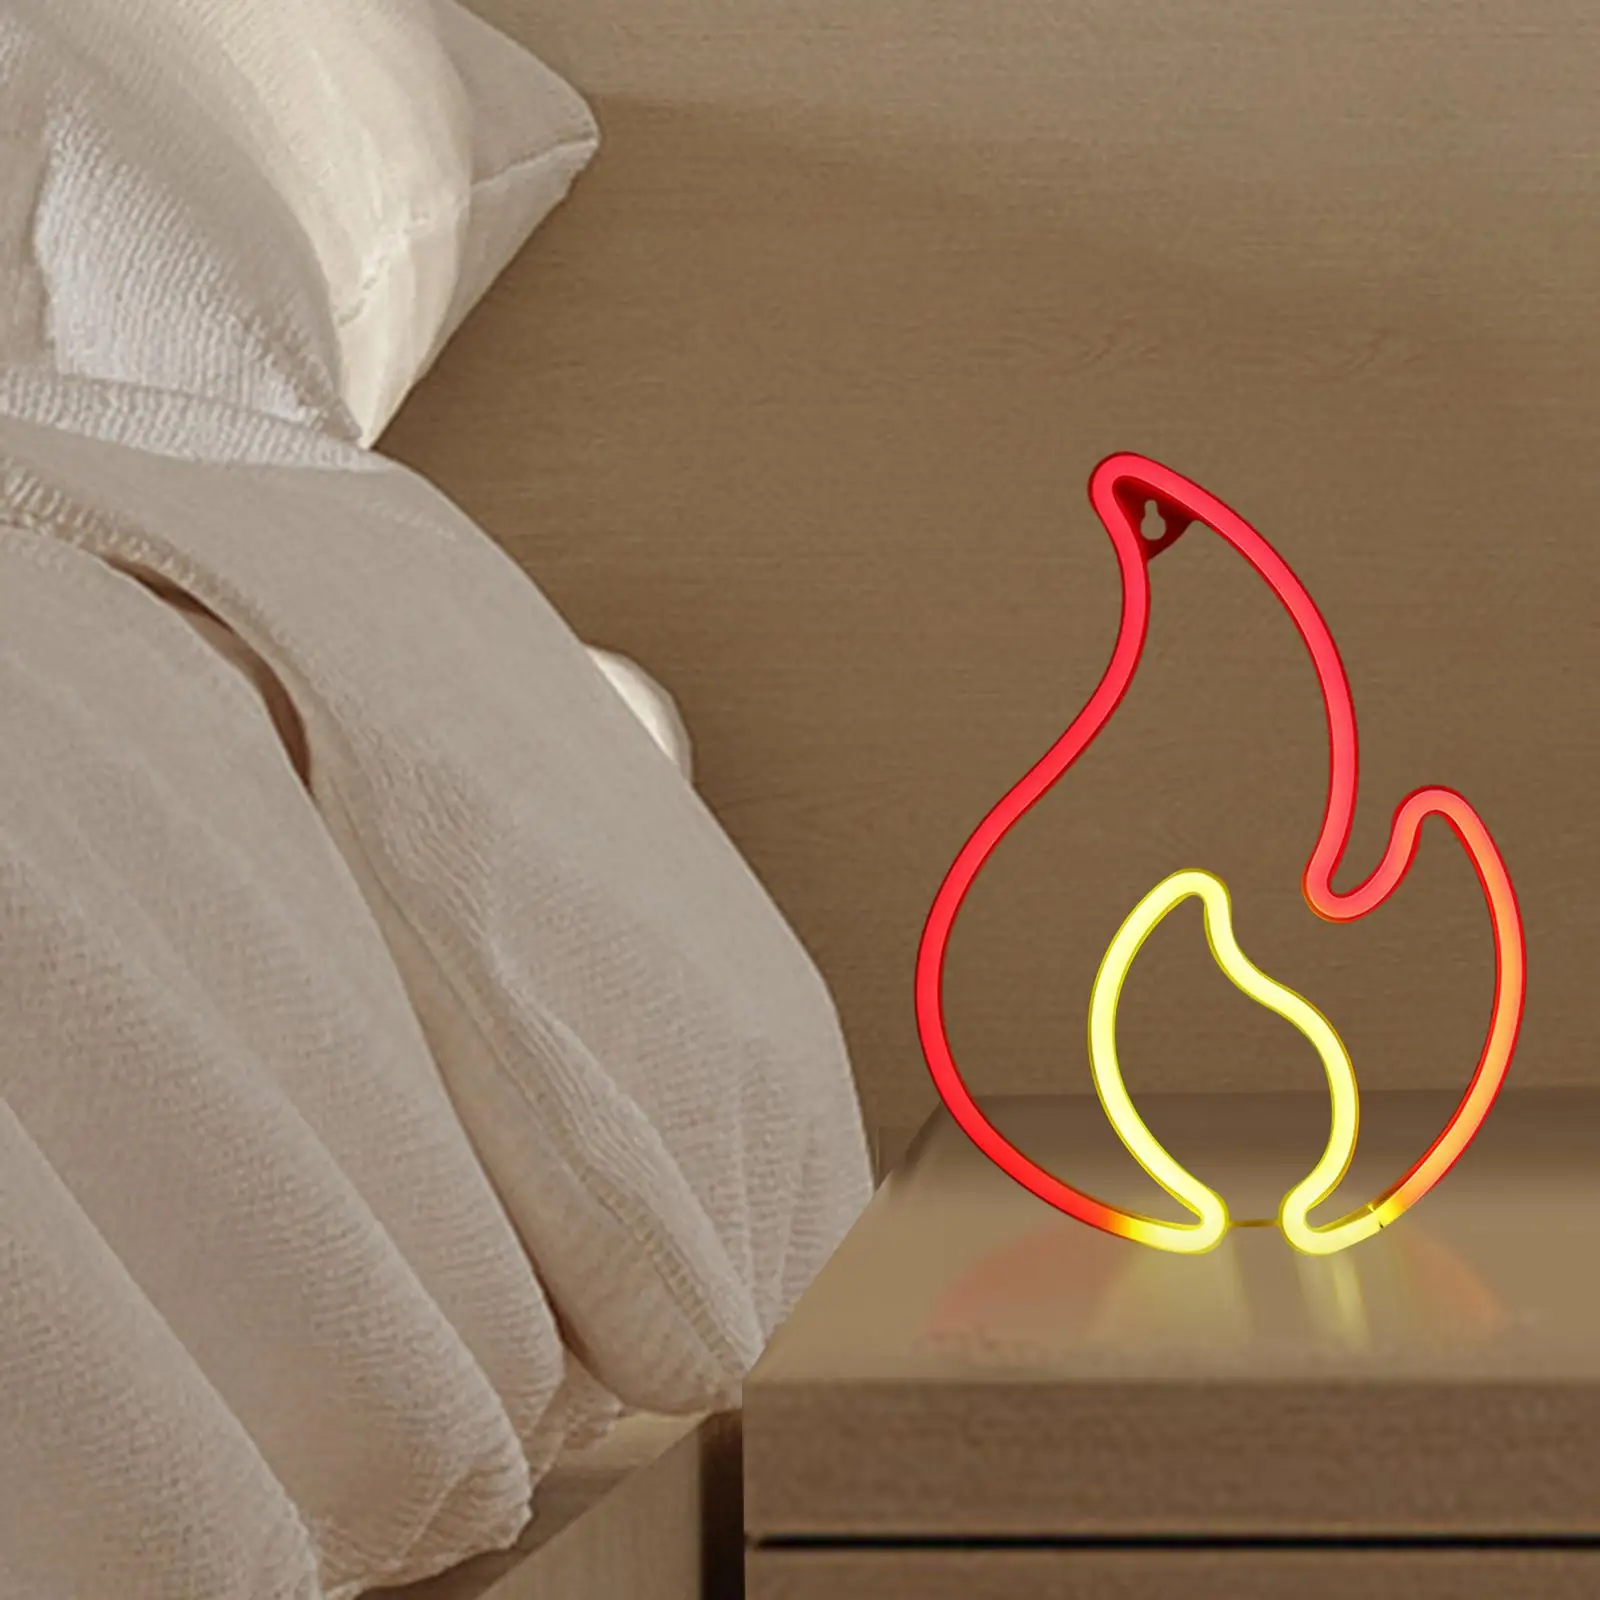 Flame LED Neon Sign Hanging Flame Shaped Light USB Powered Light up Signs Wall